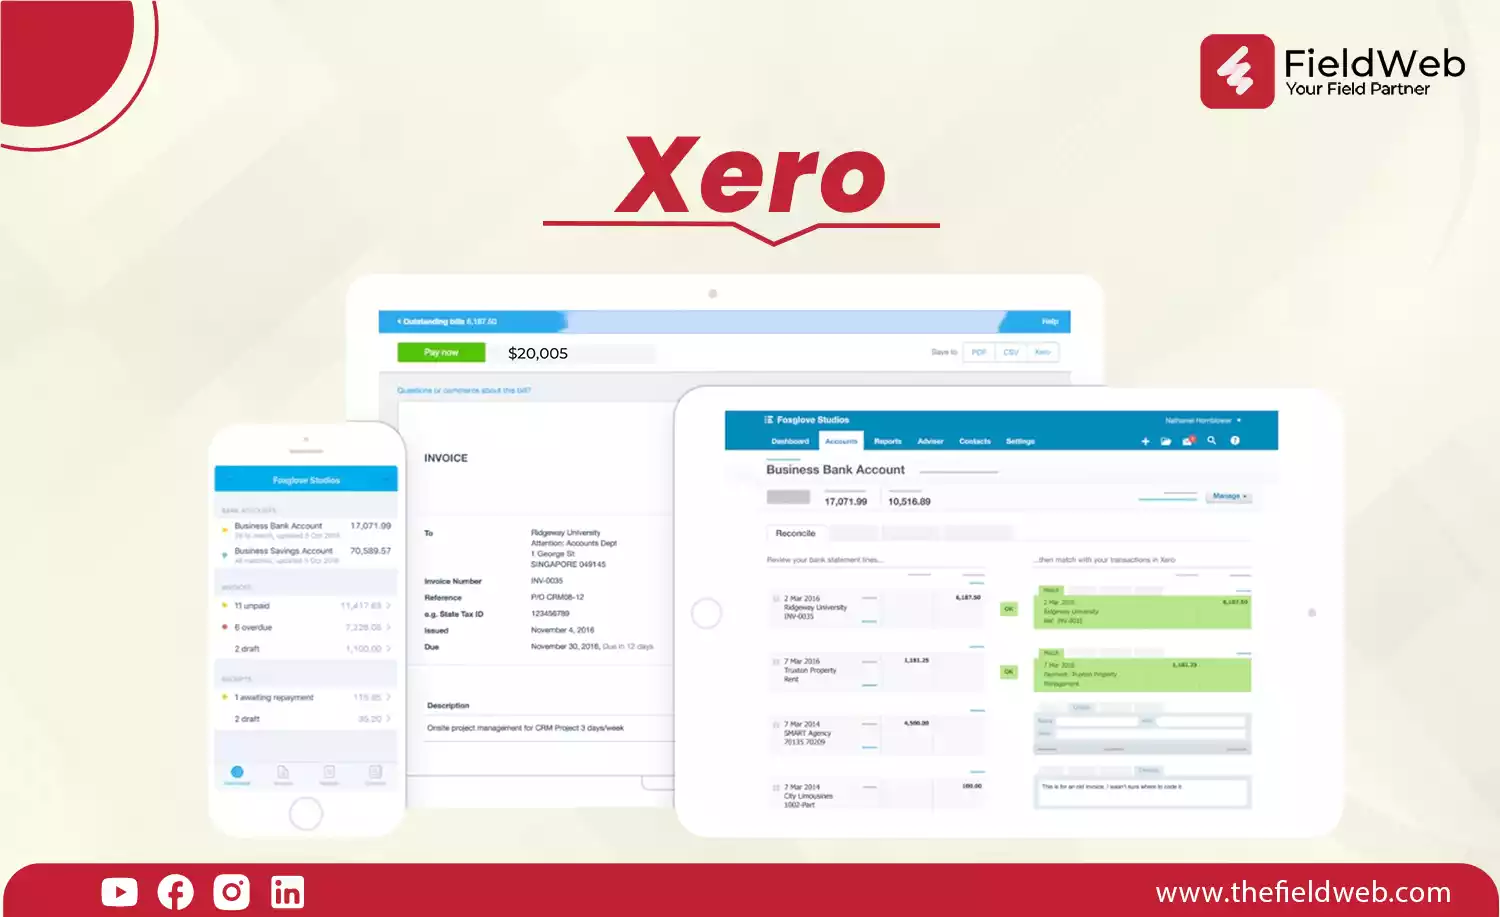 image is displaying the account management features of xero